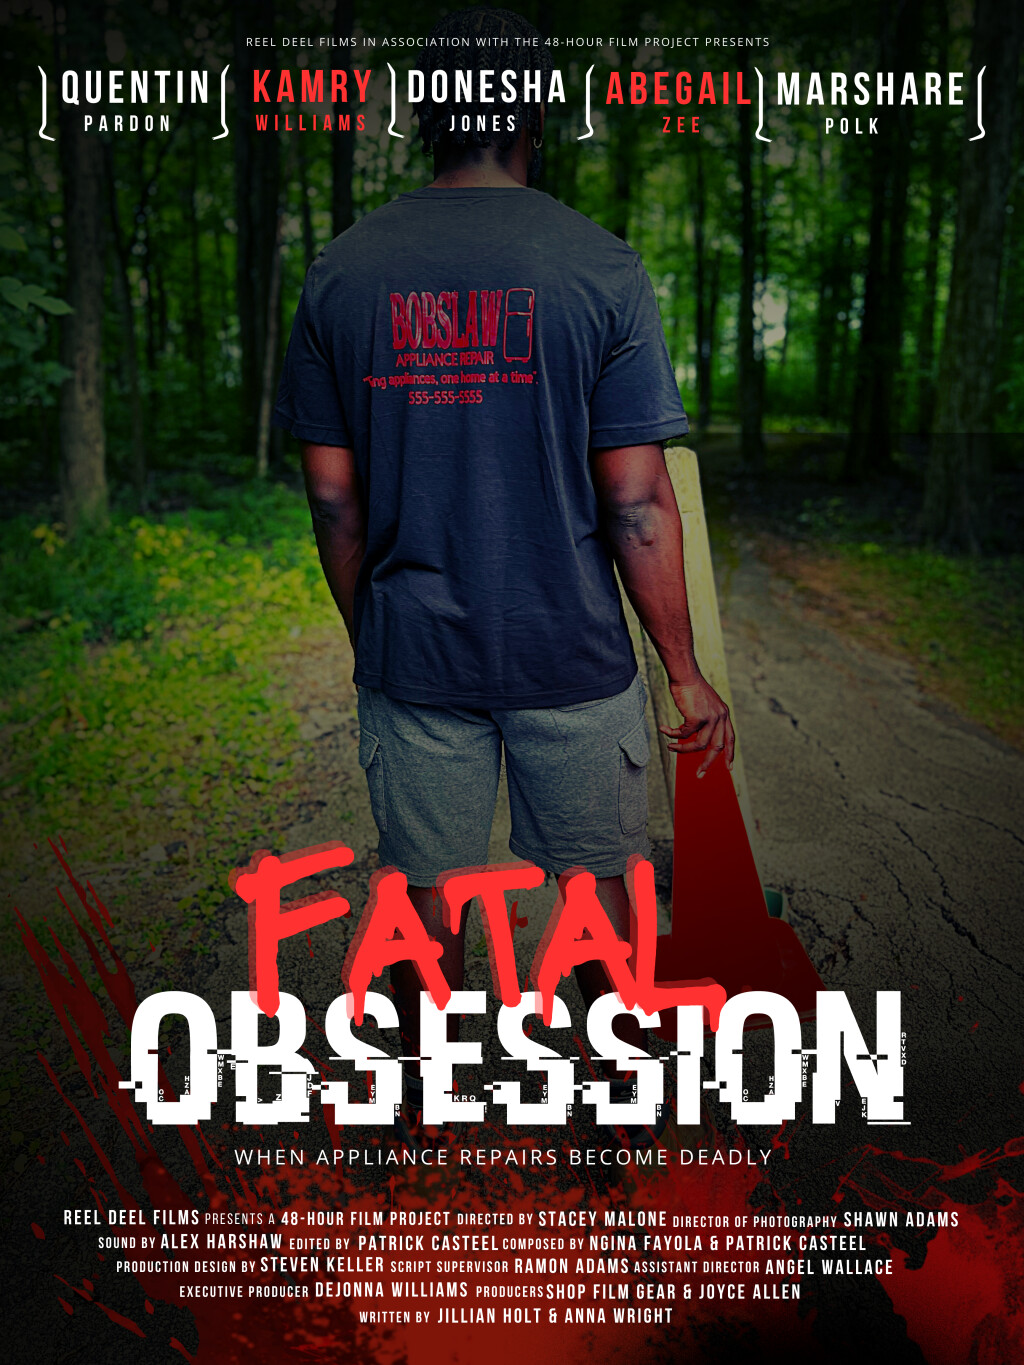 Filmposter for Fatal Obsession